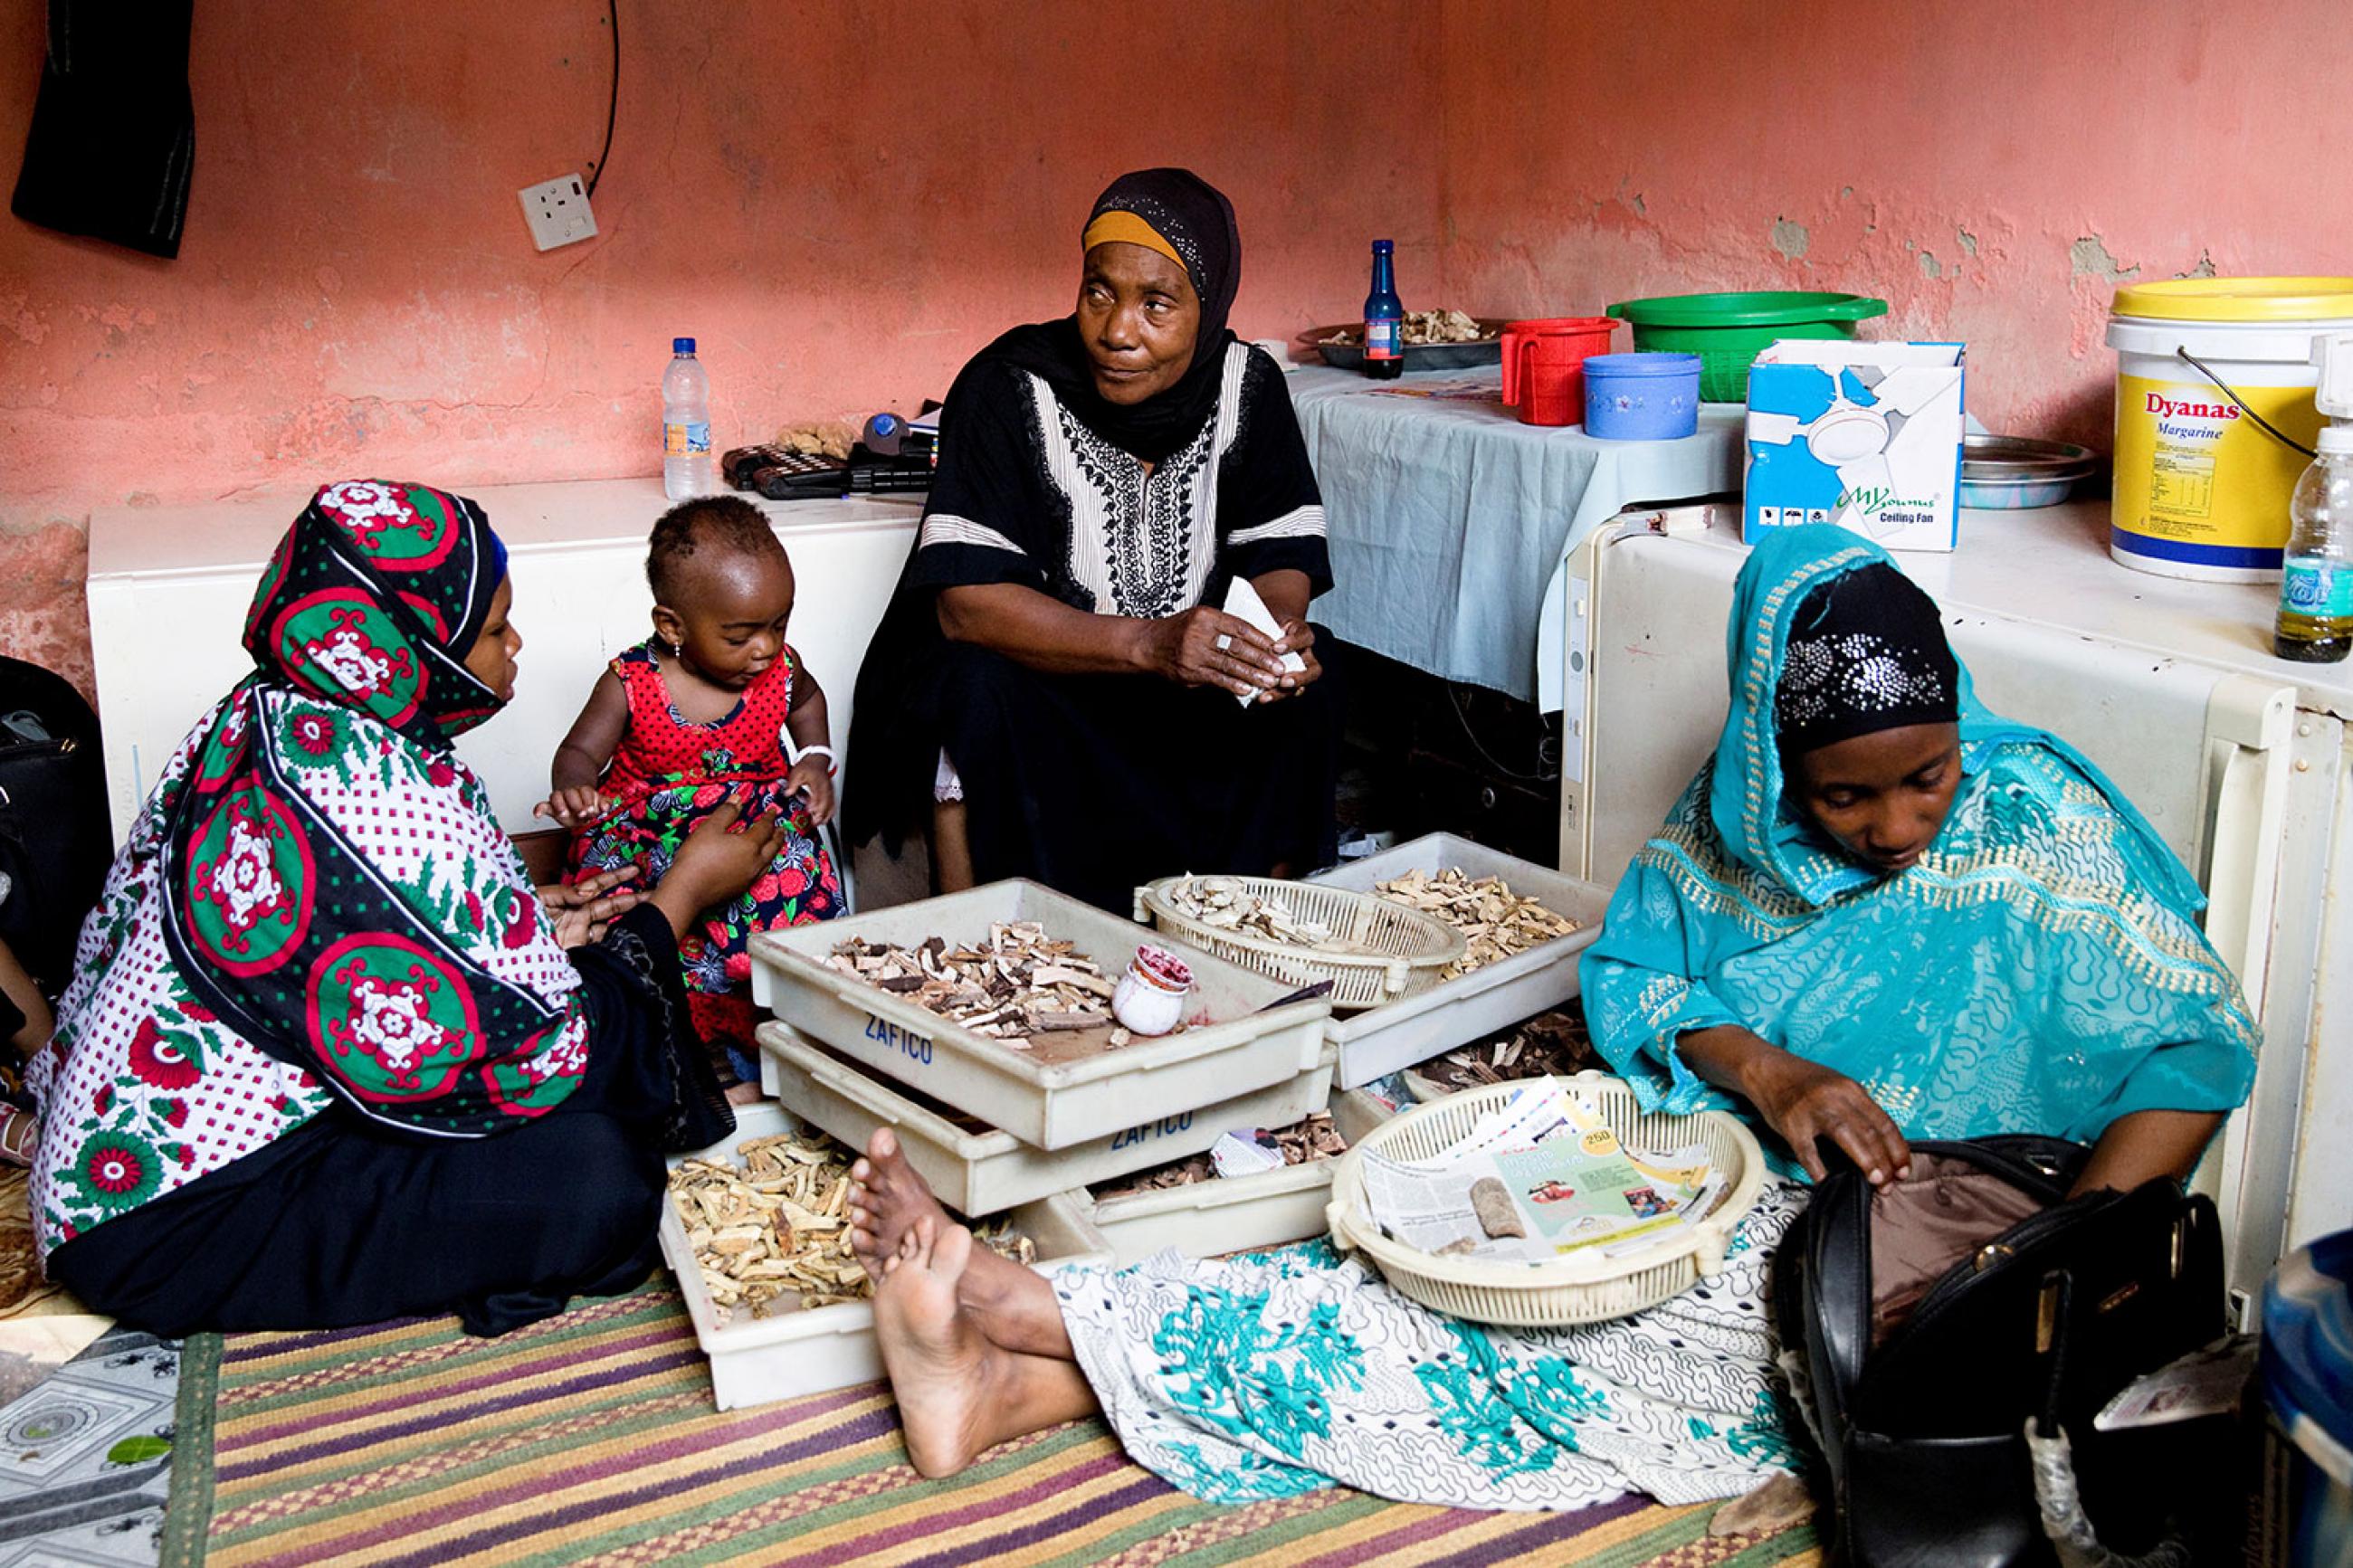 Traditional healer Bi Mwanahija Mzee folds root medicine in a piece of paper to give to a mother who complains of her child's constipation in Zanzibar City, Tanzania on January 31, 2019. The photo shows the healer facing the camera and sitting between two other women and a child. REUTERS/Nicky Woo 